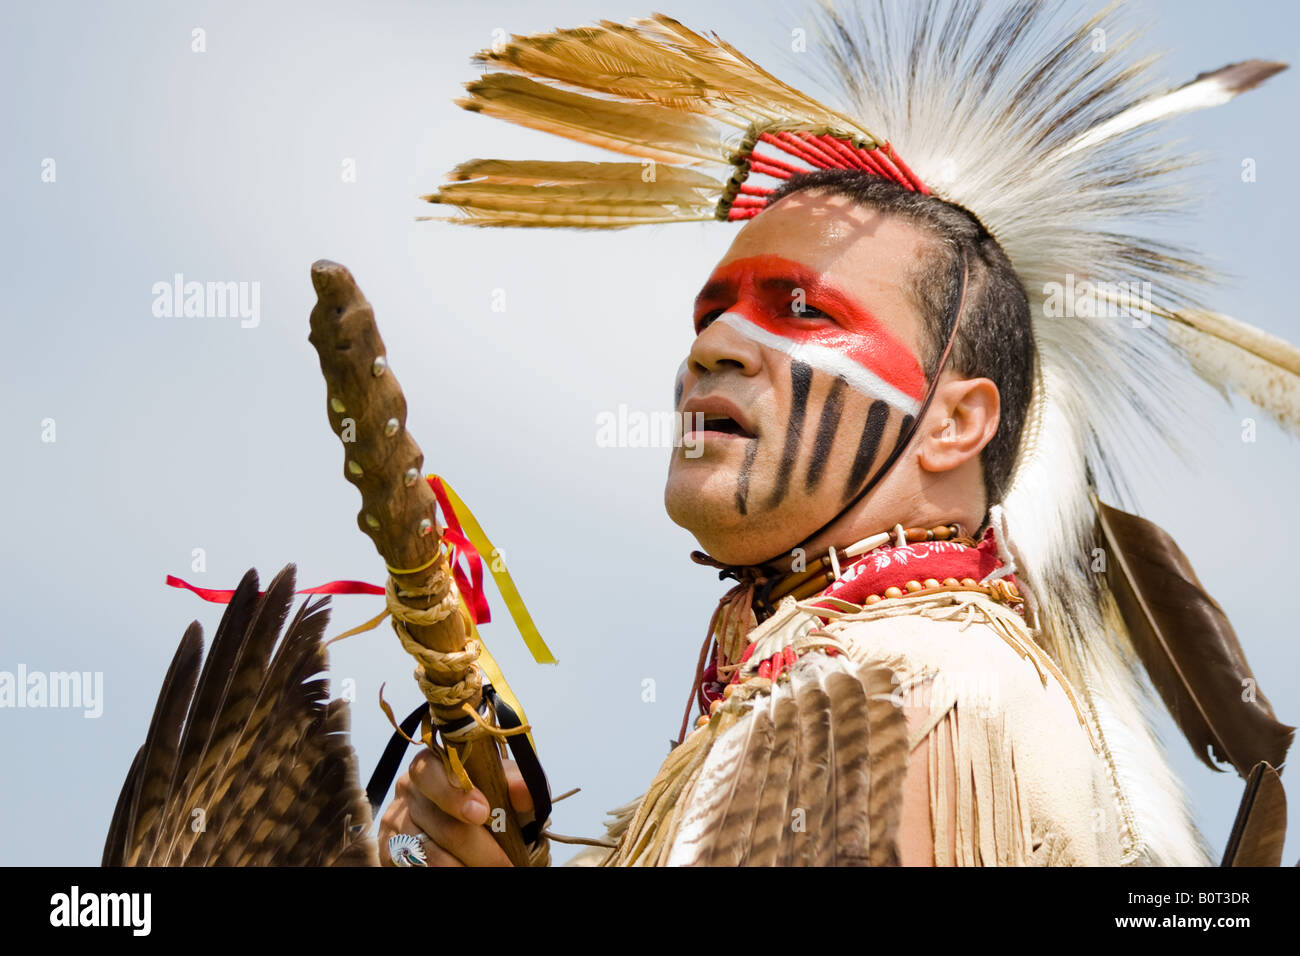 American Indian dancer at the 8th Annual Red Wing Native American PowWow in Virginia Beach, Virginia Stock Photo